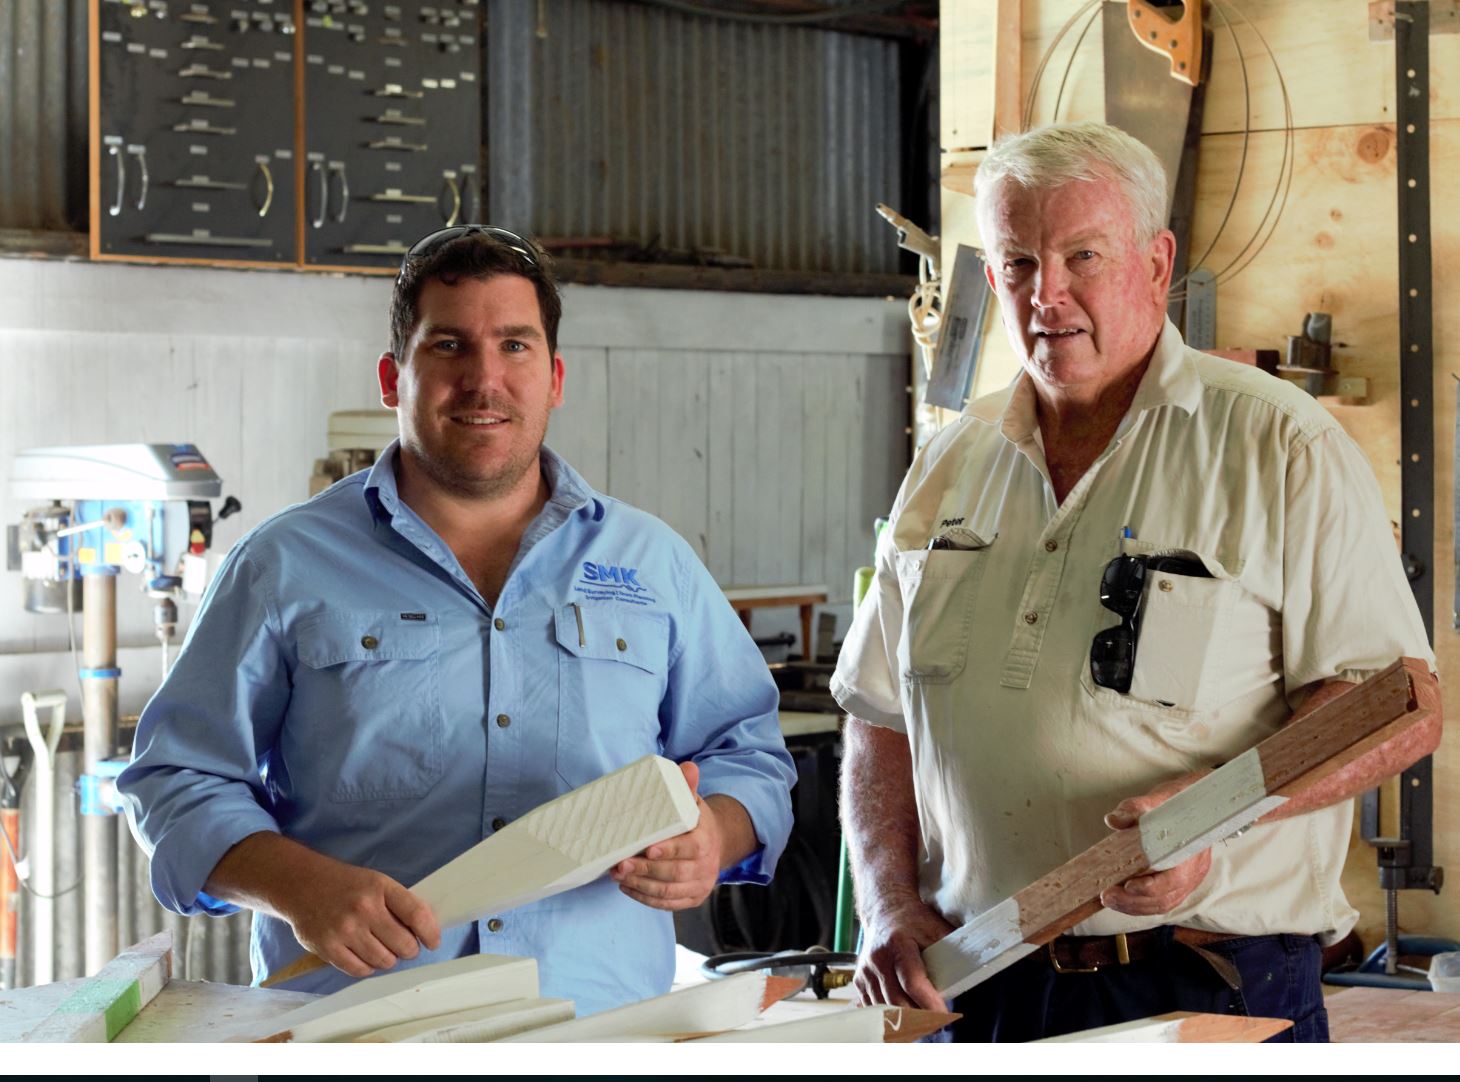 SMK and Goondiwindi Men’s Shed representatives working together to supply to Inland Rail